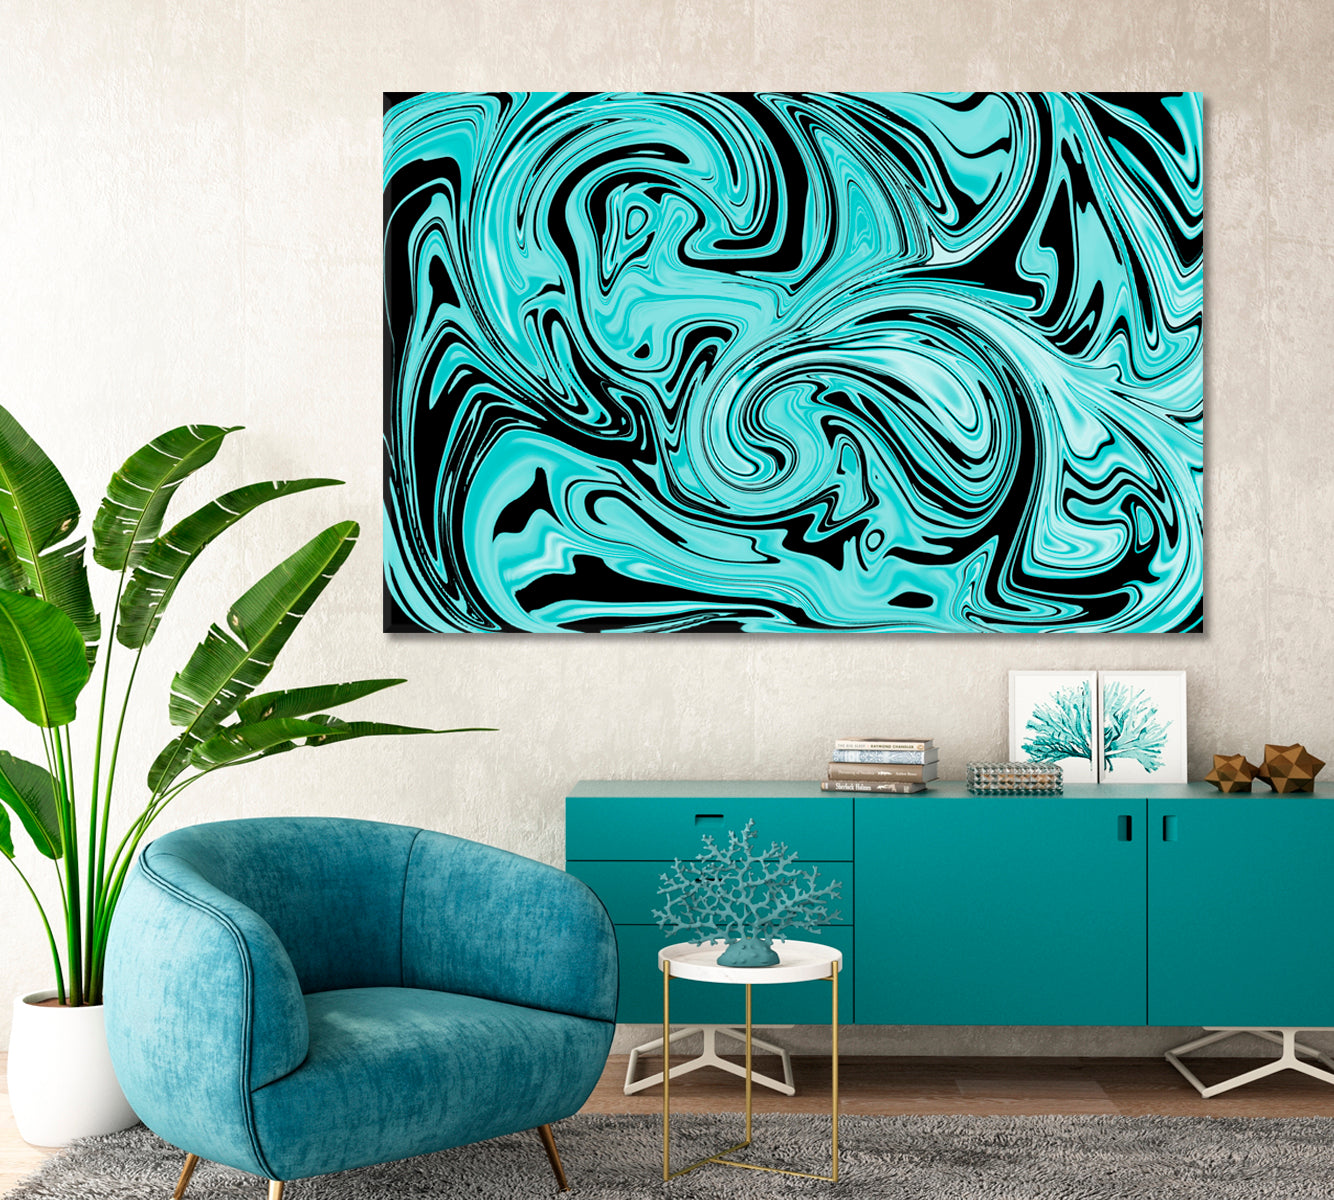 Abstract Blue and Marble Swirls Canvas Print-Canvas Print-CetArt-1 Panel-24x16 inches-CetArt